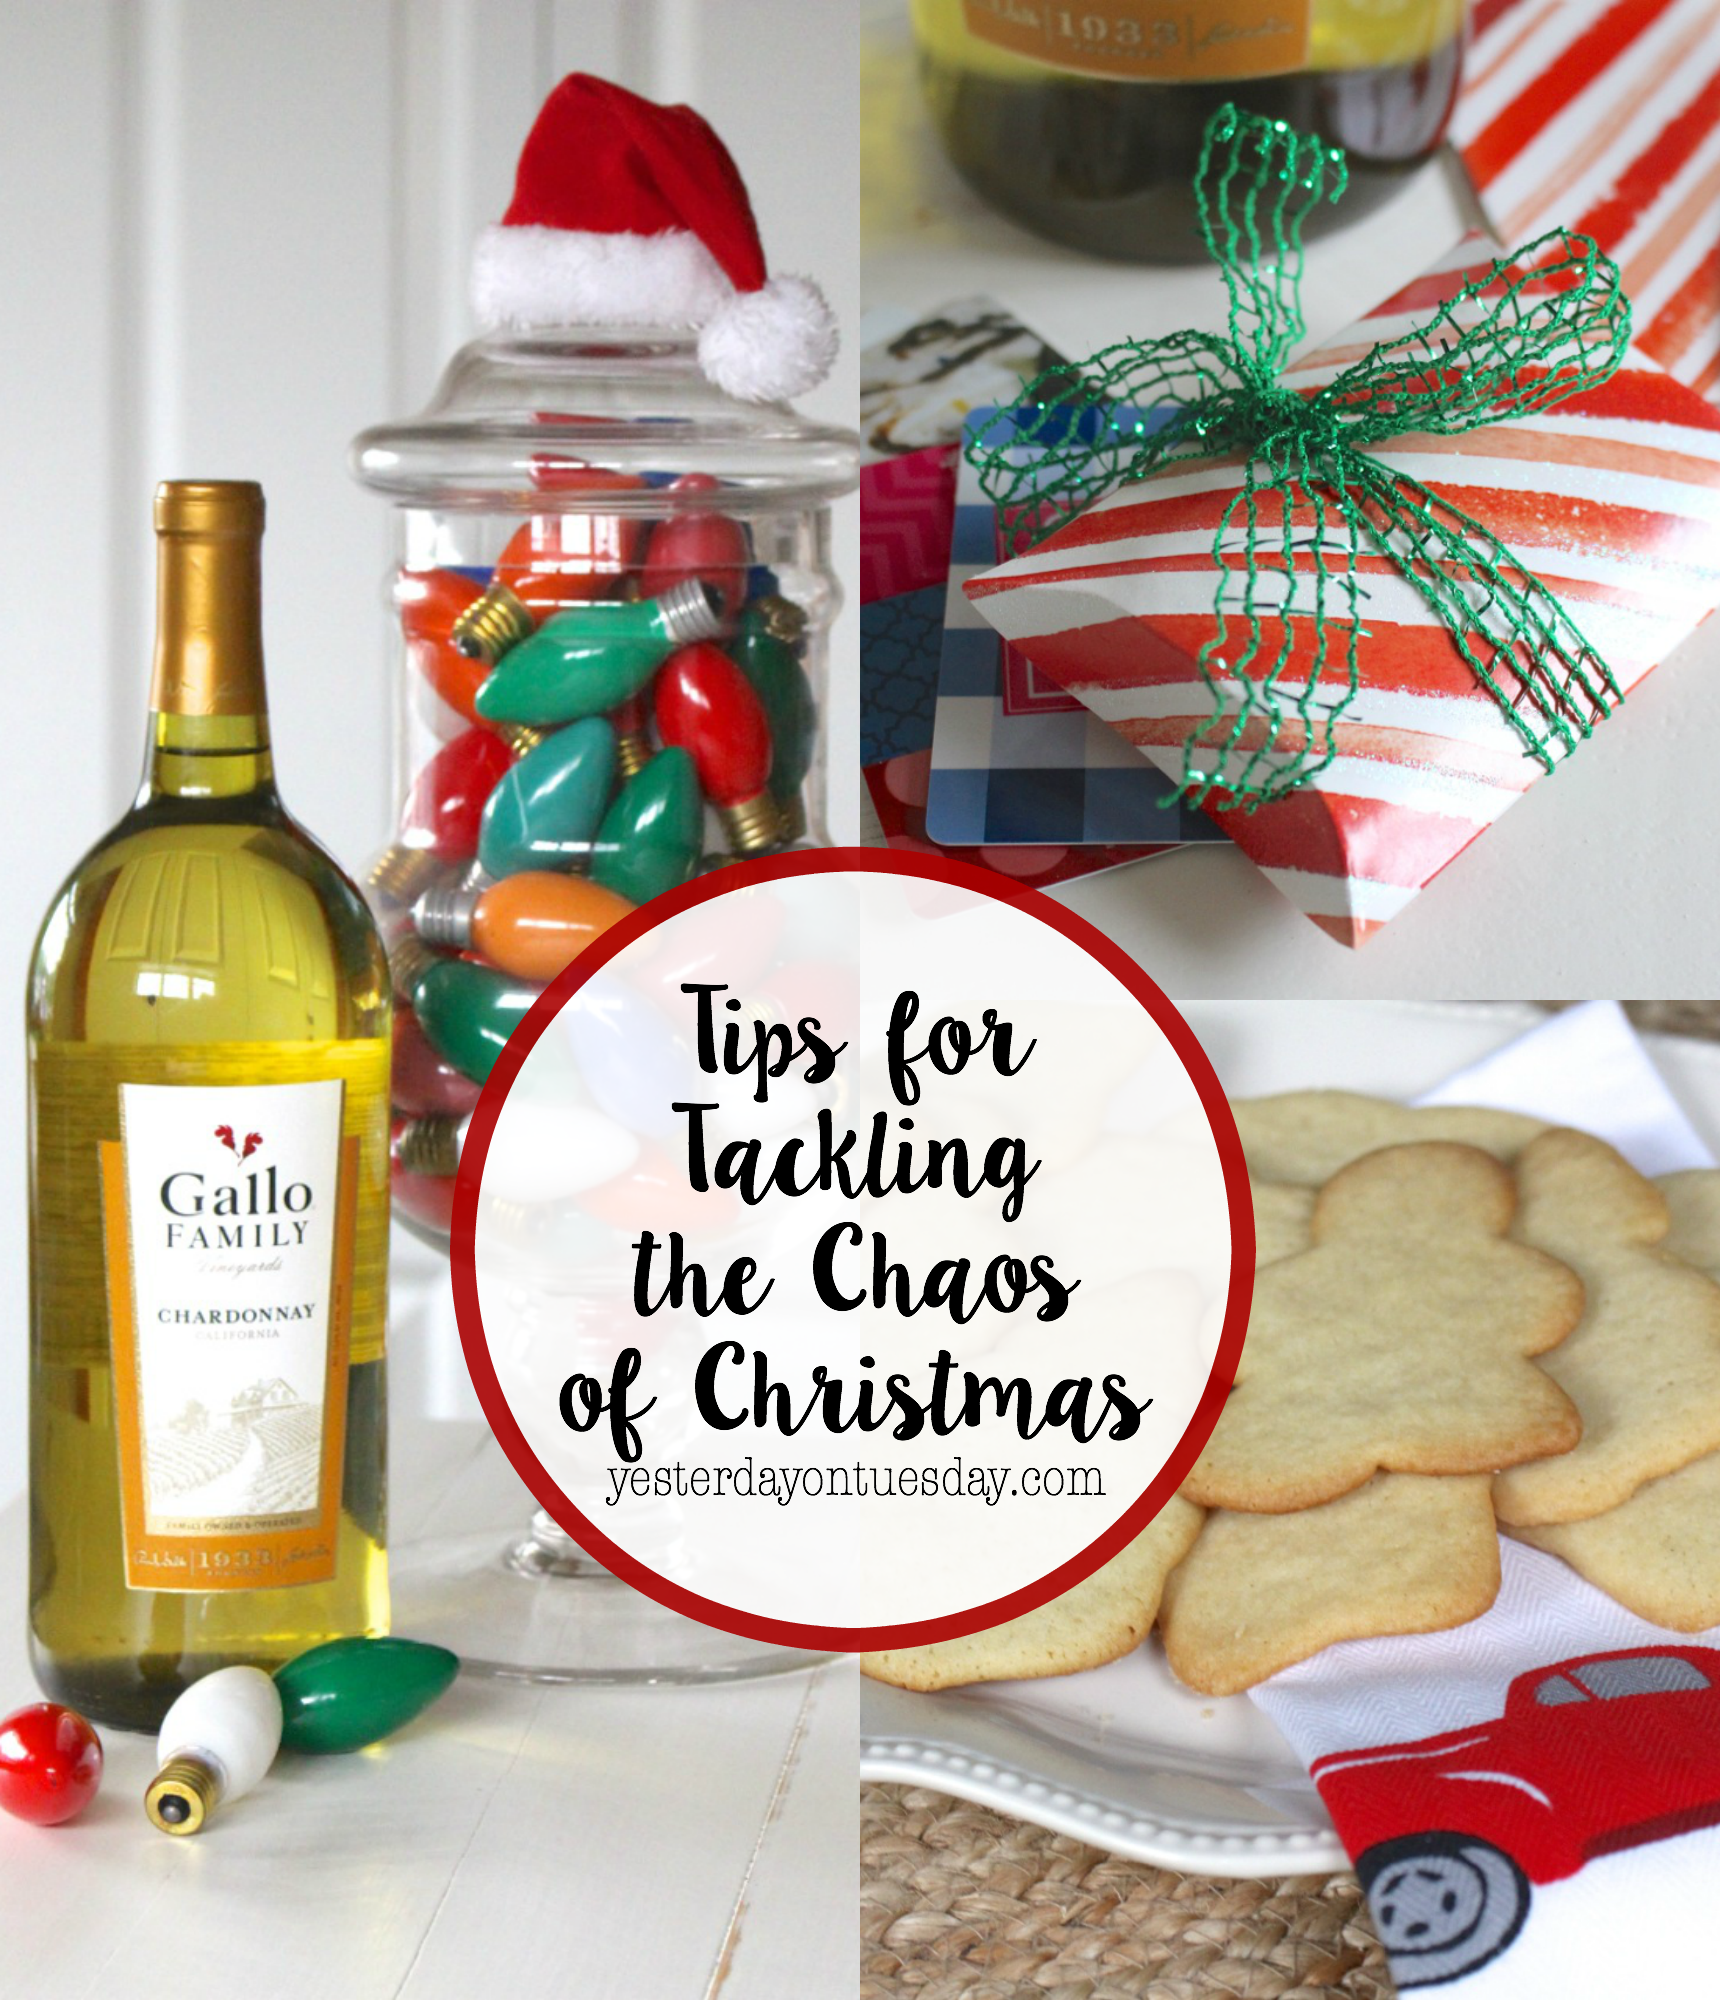 3 Tips for Tackling the Chaos of Christmas